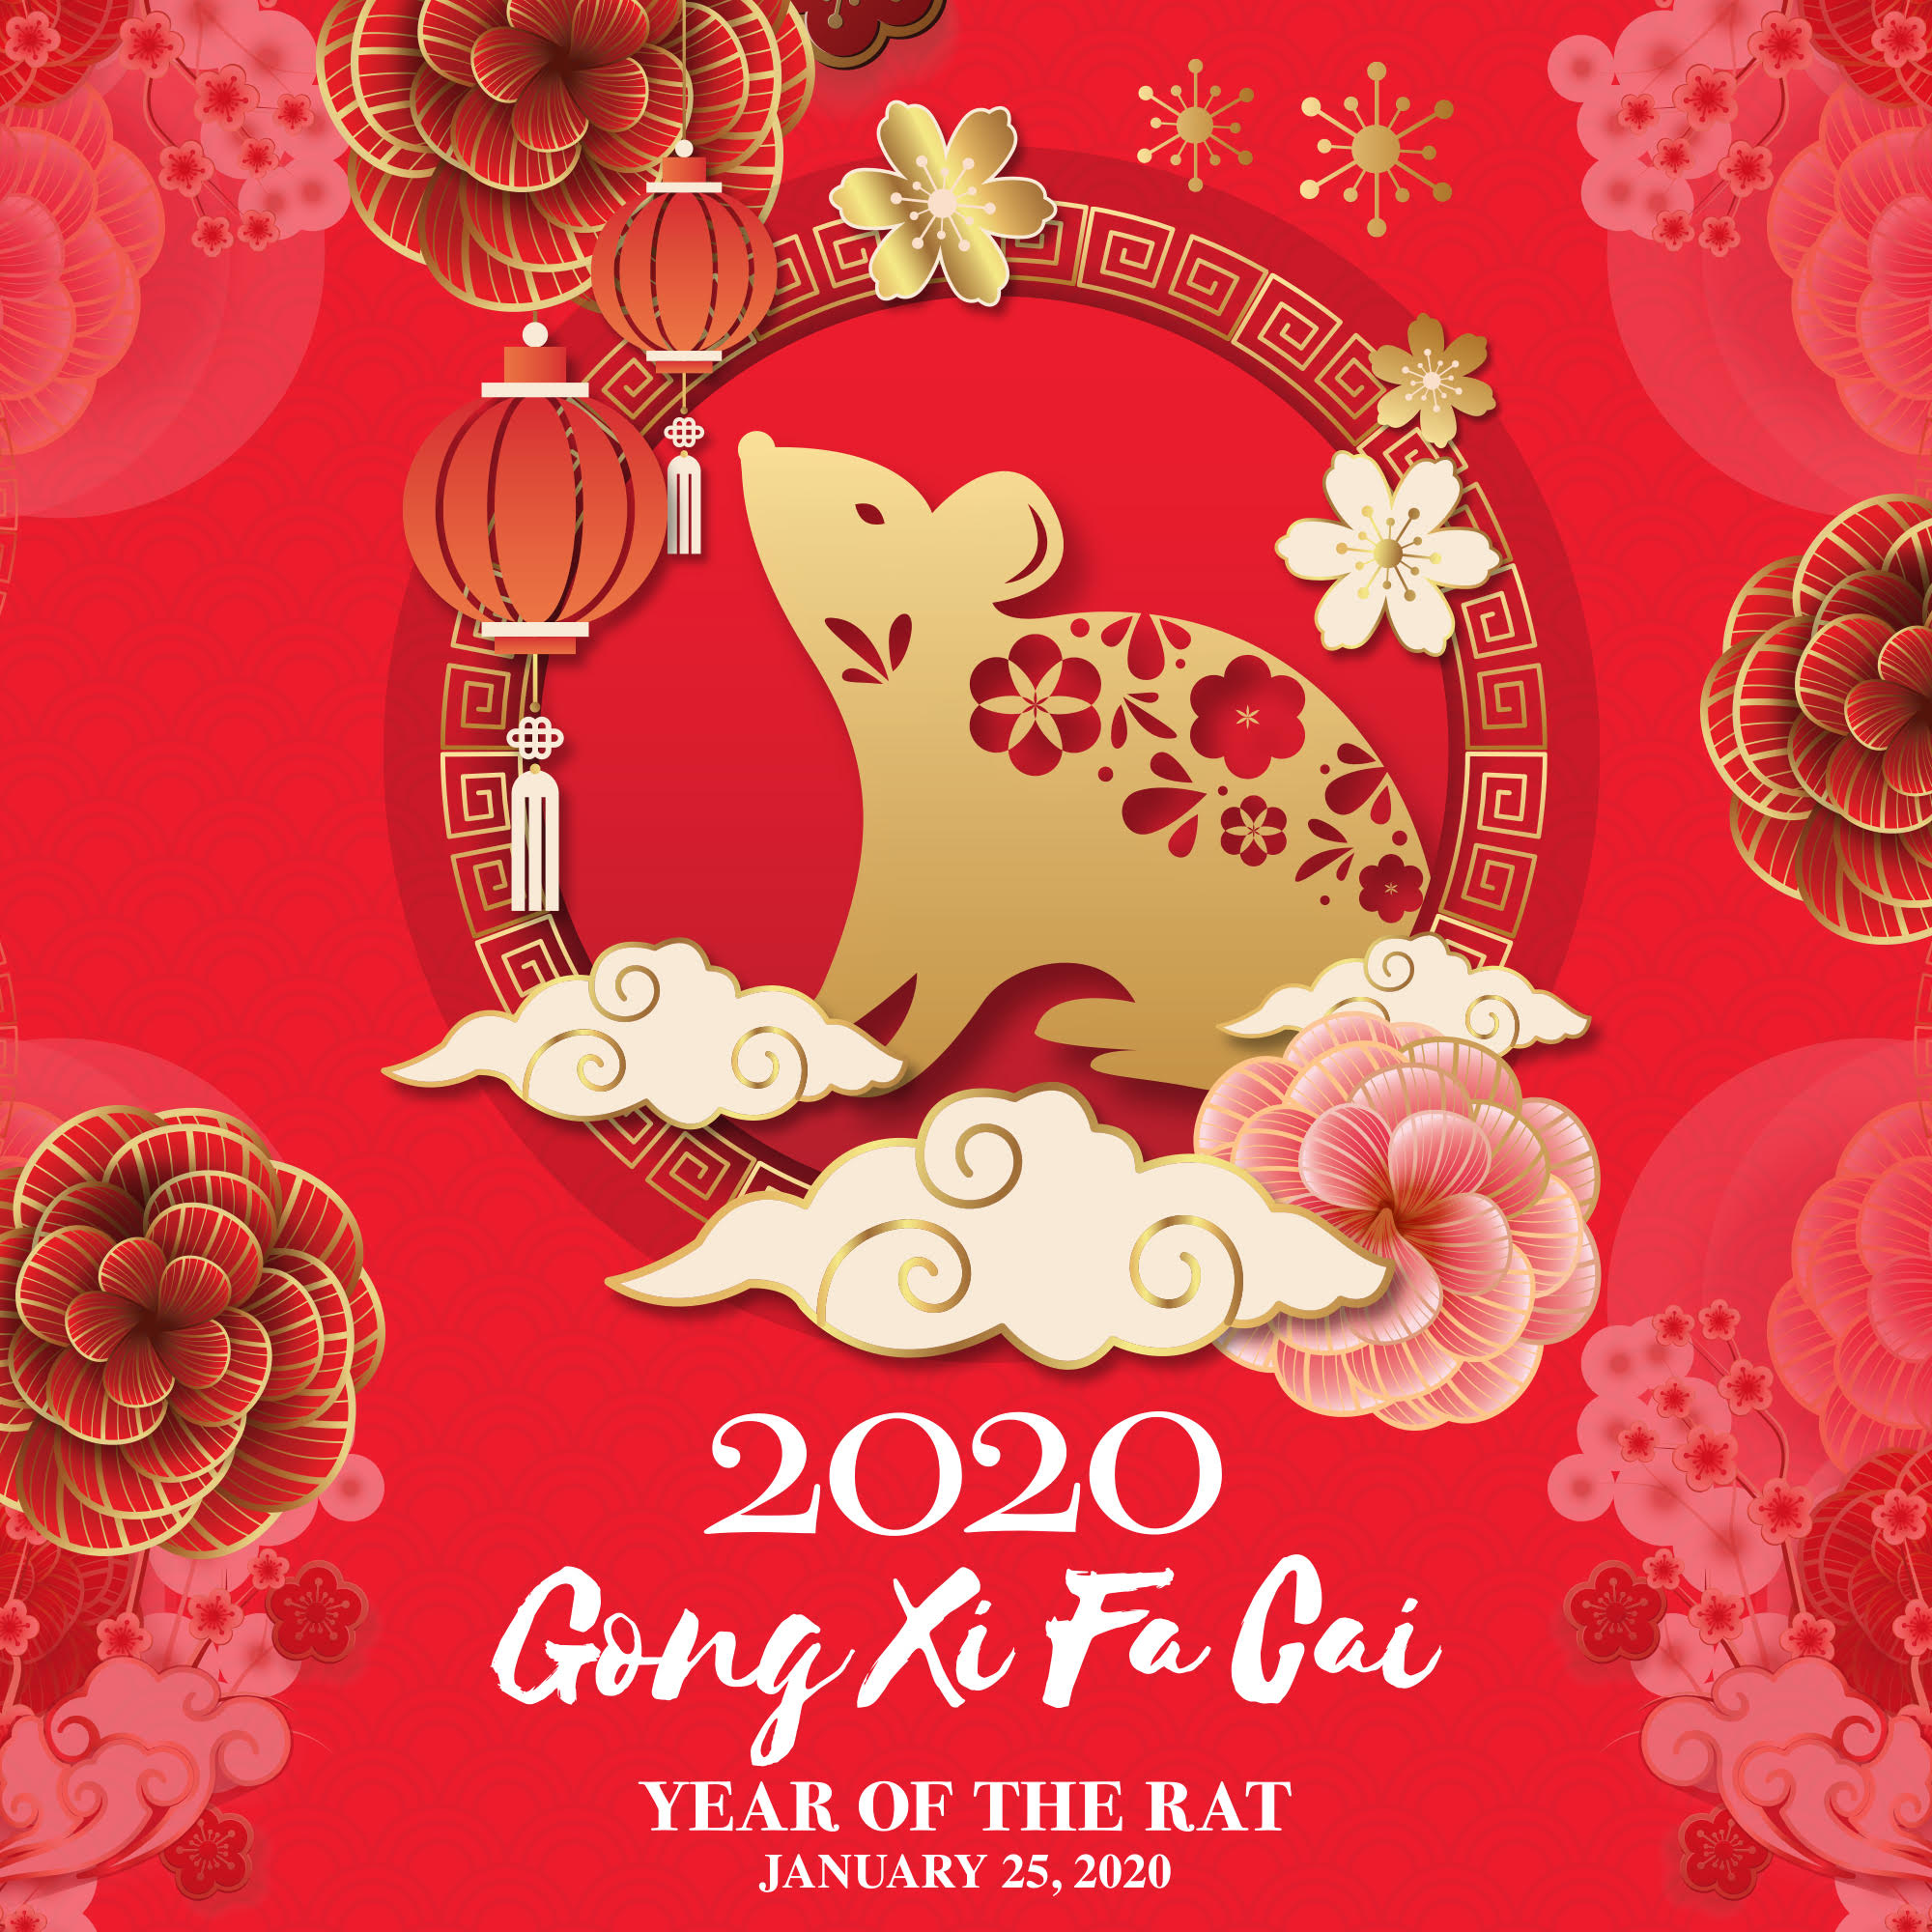 Kung Hei Fat Choi: Go on a food odyssey this Chinese New Year